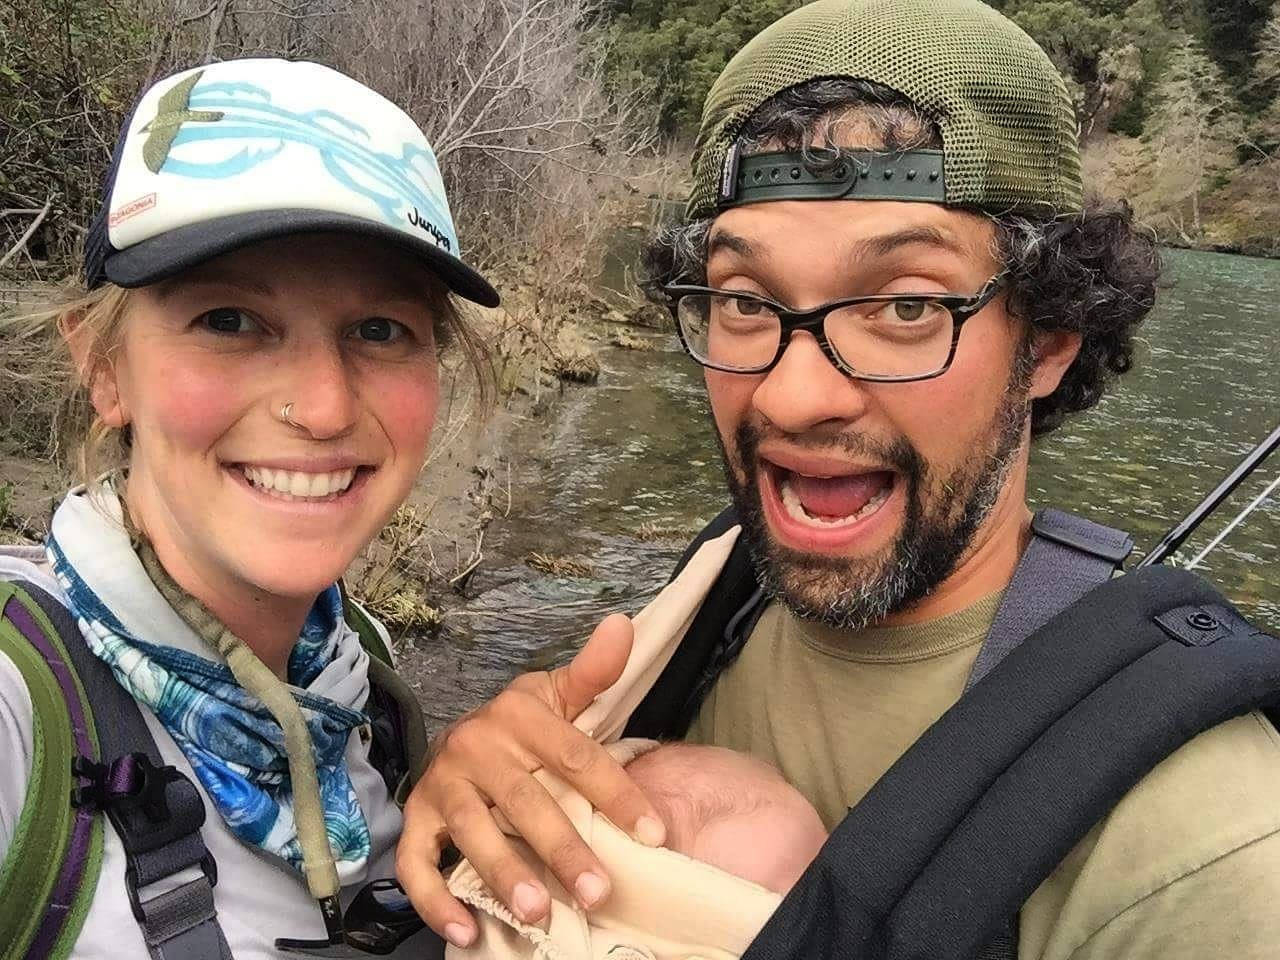 Being new parents doesn't stop these two from their passion to fish.